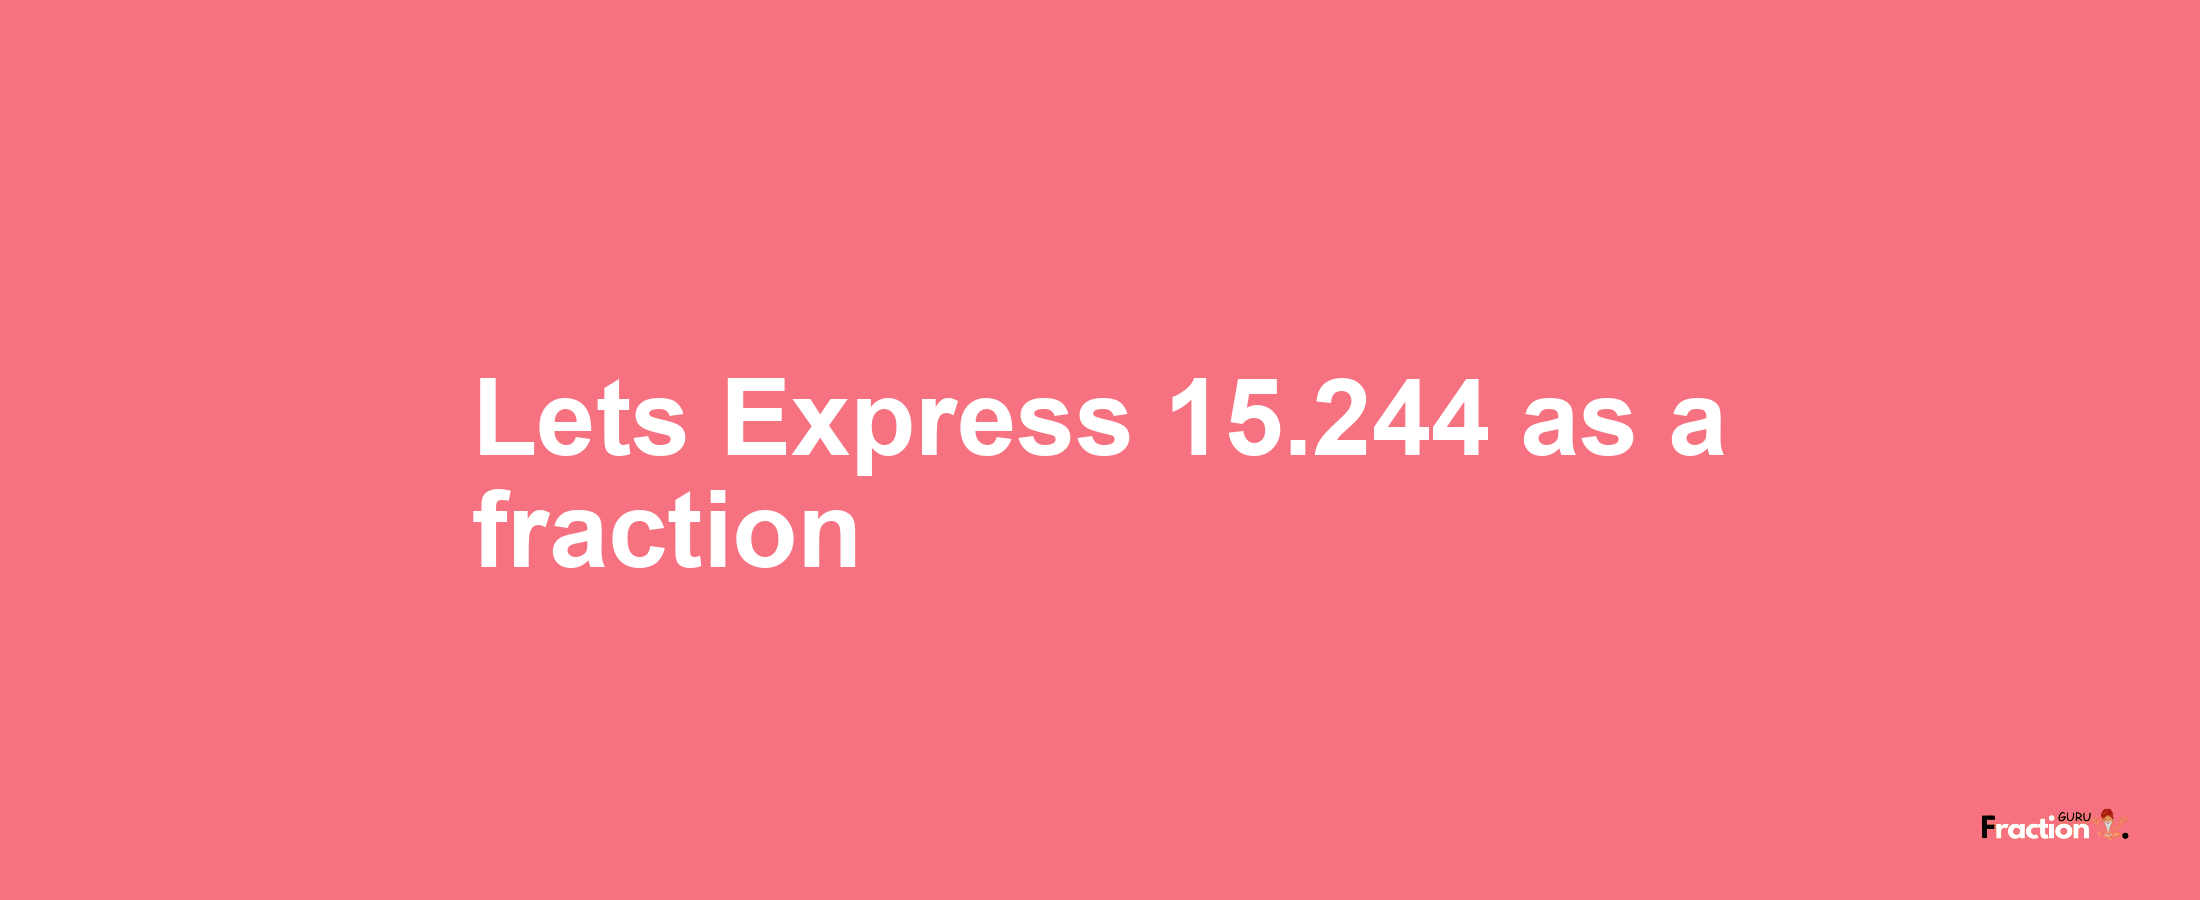 Lets Express 15.244 as afraction